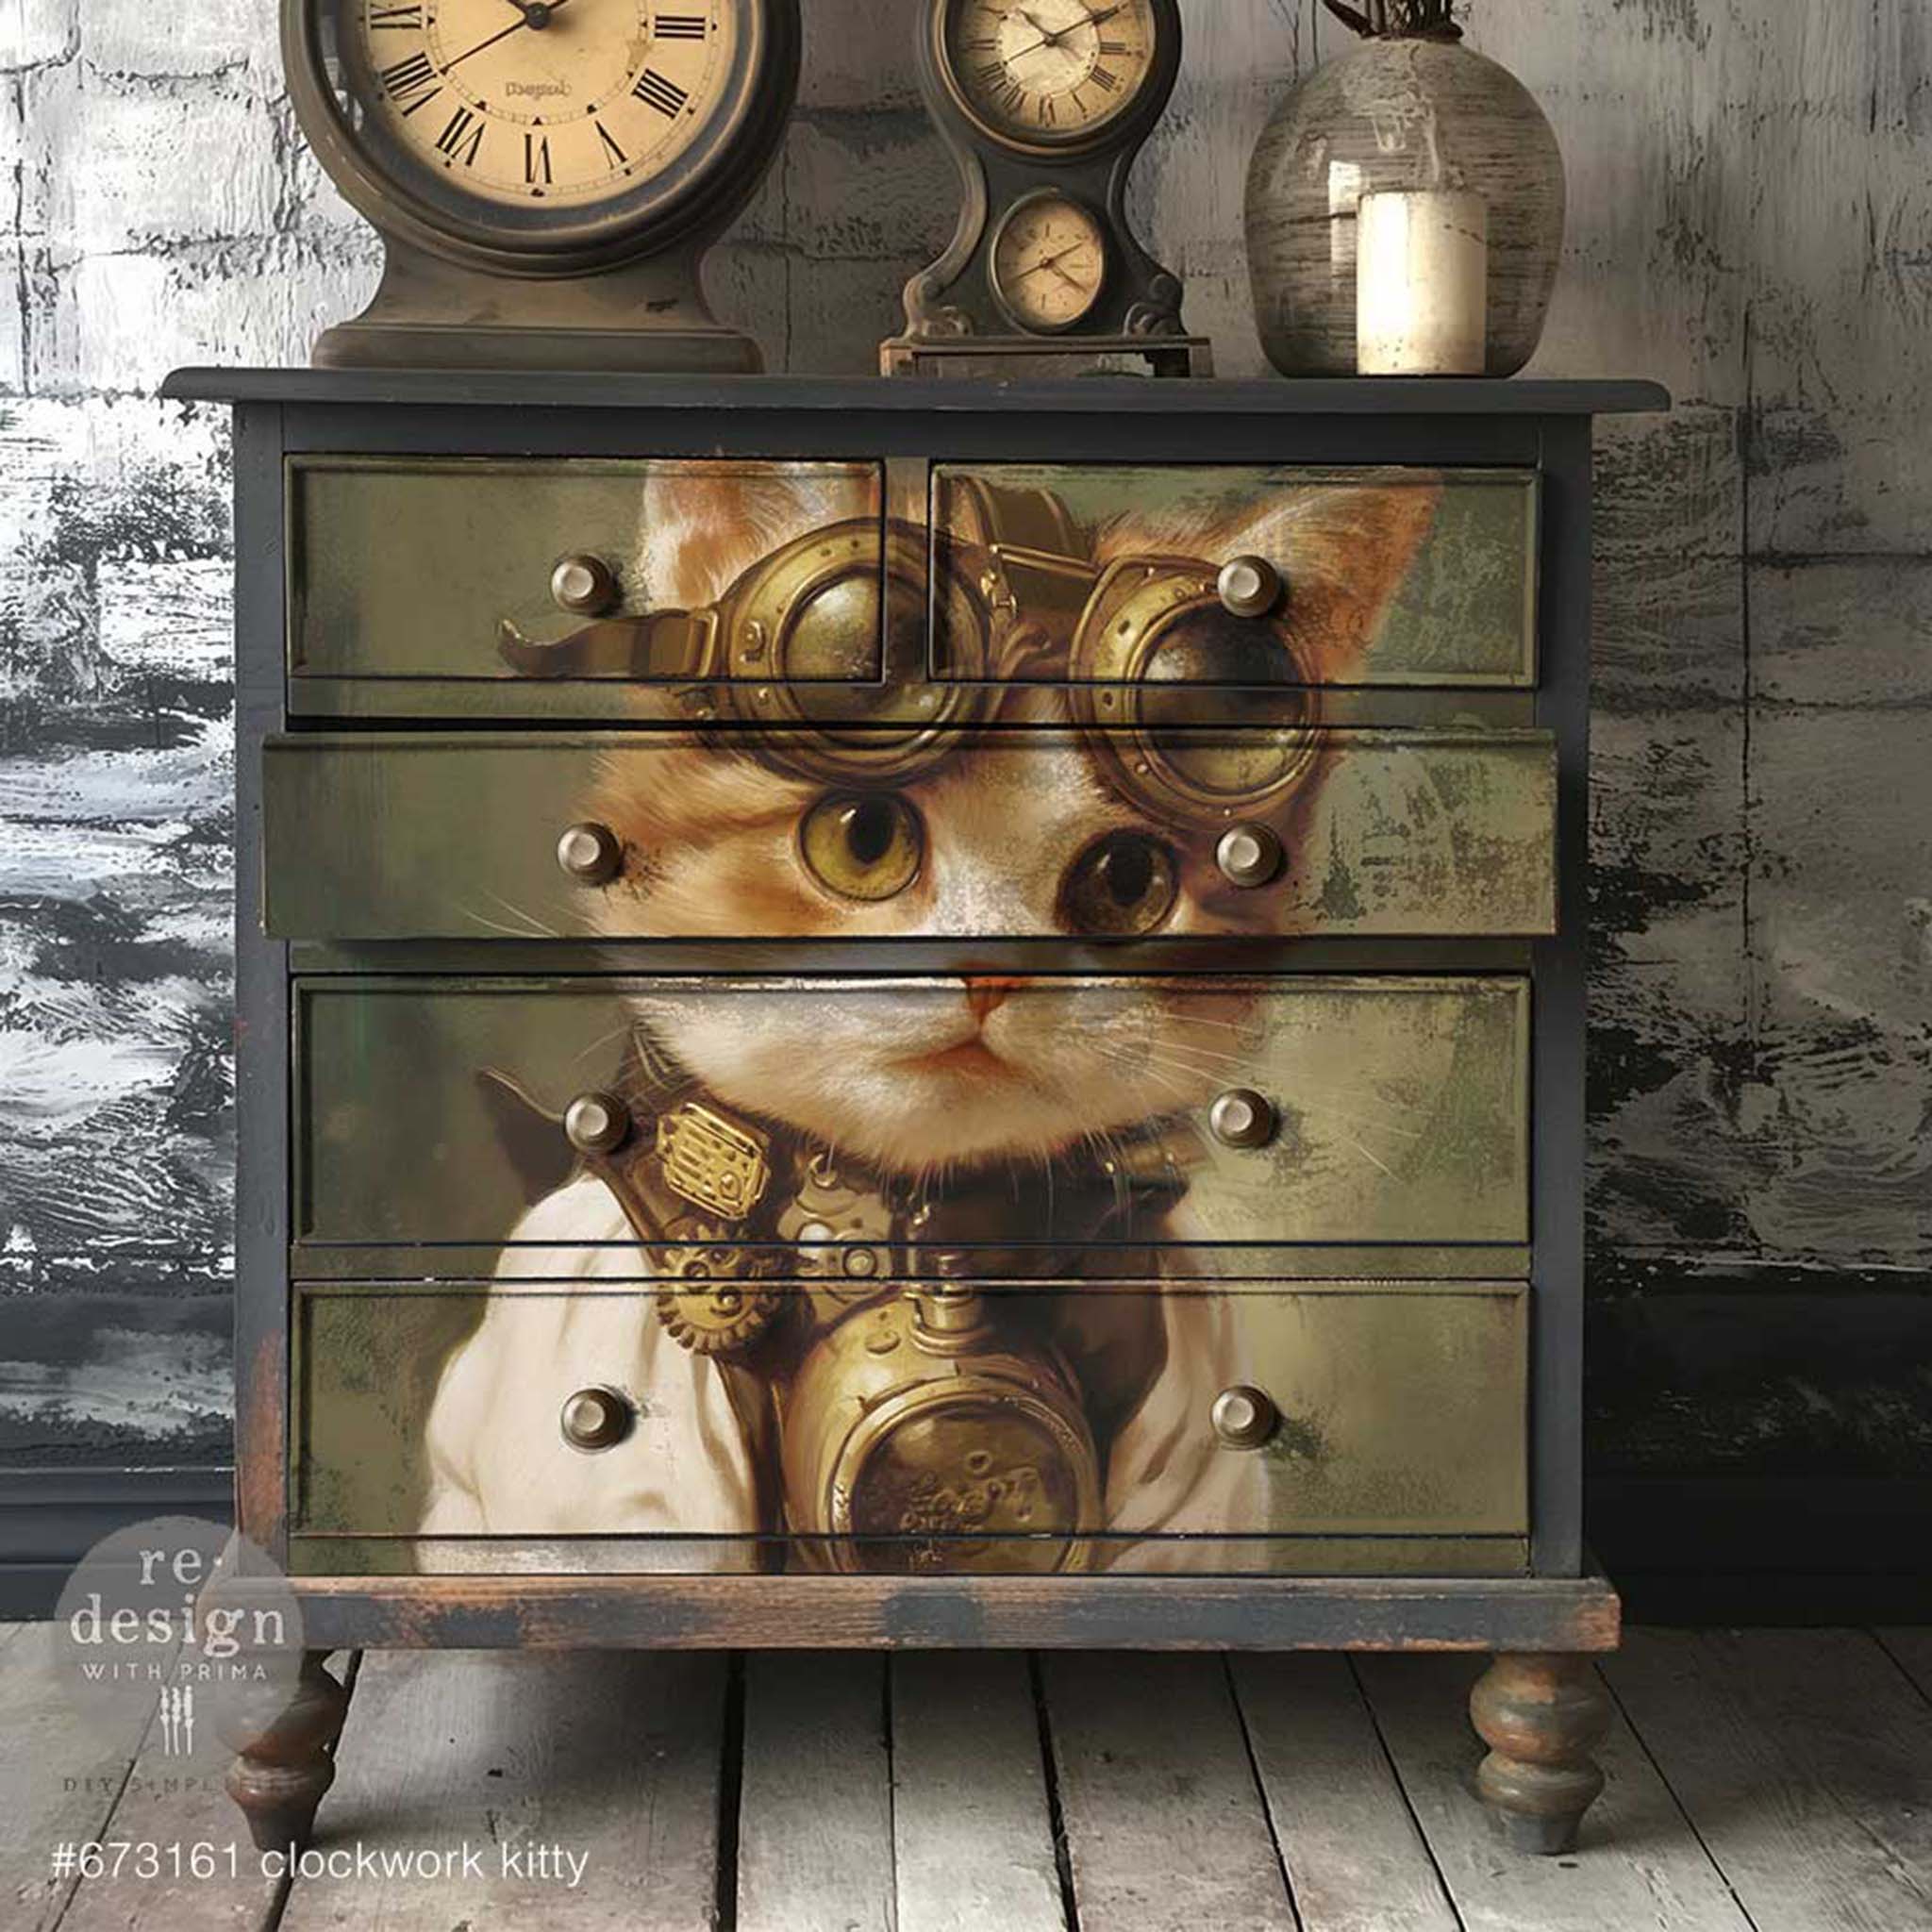 A vintage 5-drawer dresser is painted dark gray and features ReDesign with Prima's Clockwork Kitty A1 fiber paper on the drawers.